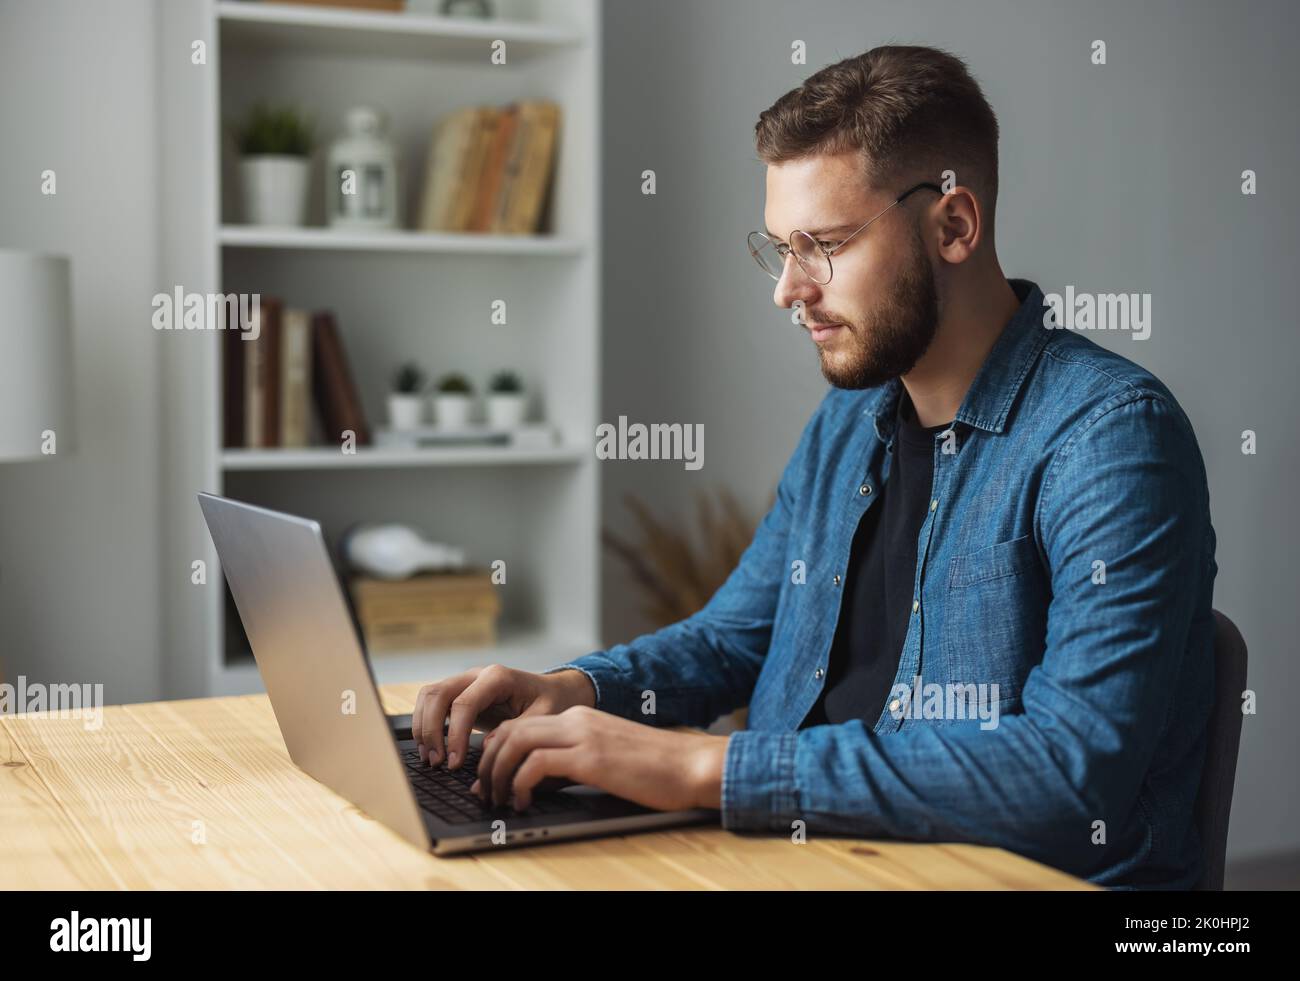 Man working from home Stock Photo